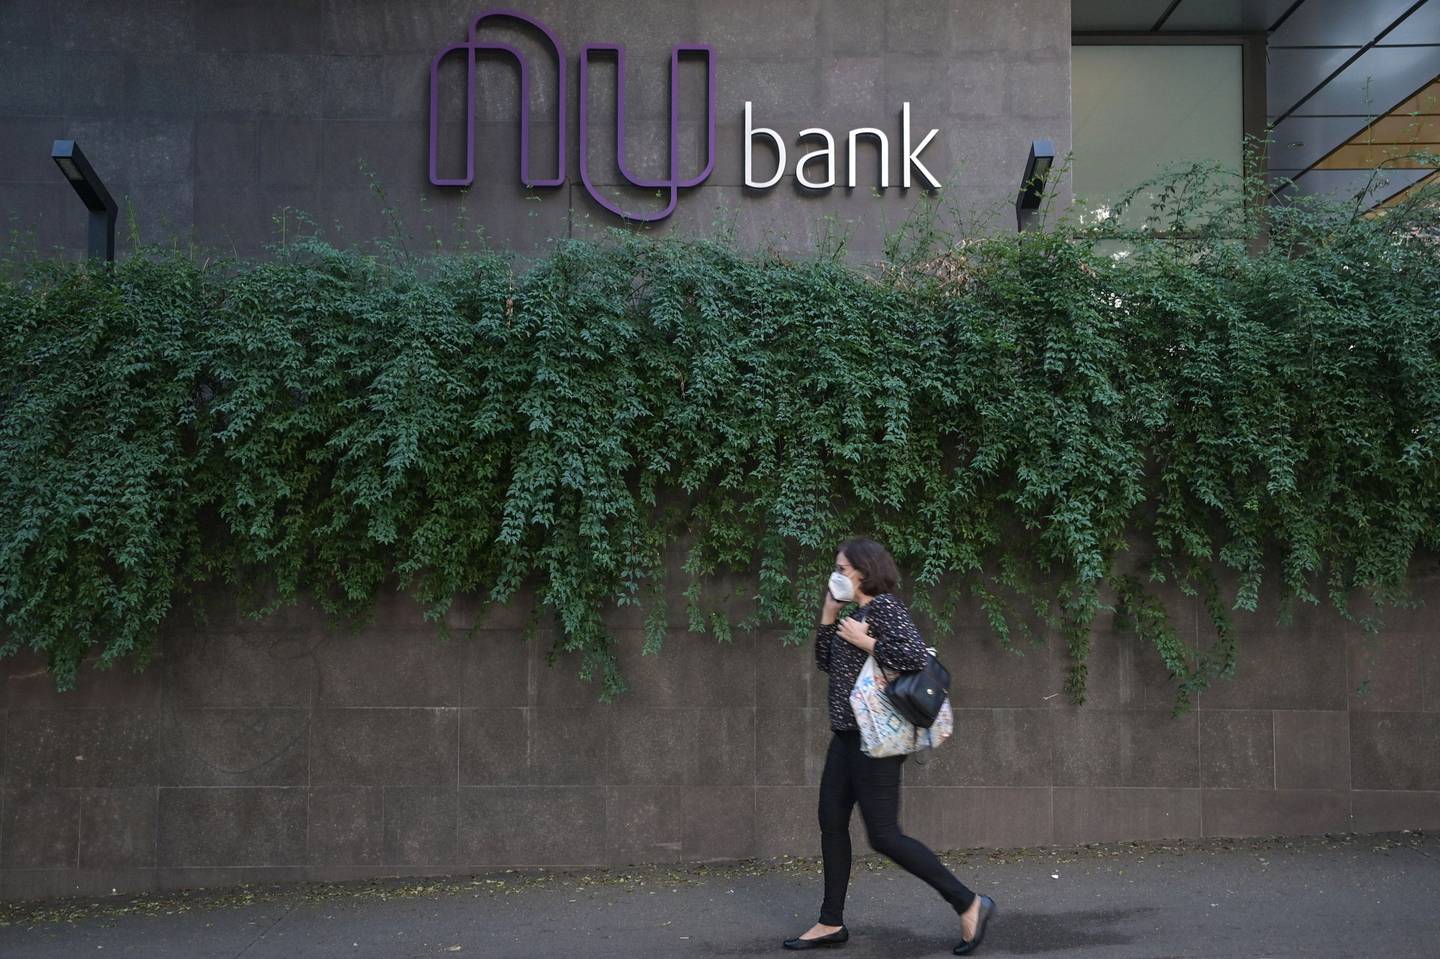 Nubank: Second-quarter results will show effects of high interest rates on the neobank's loan portfolio